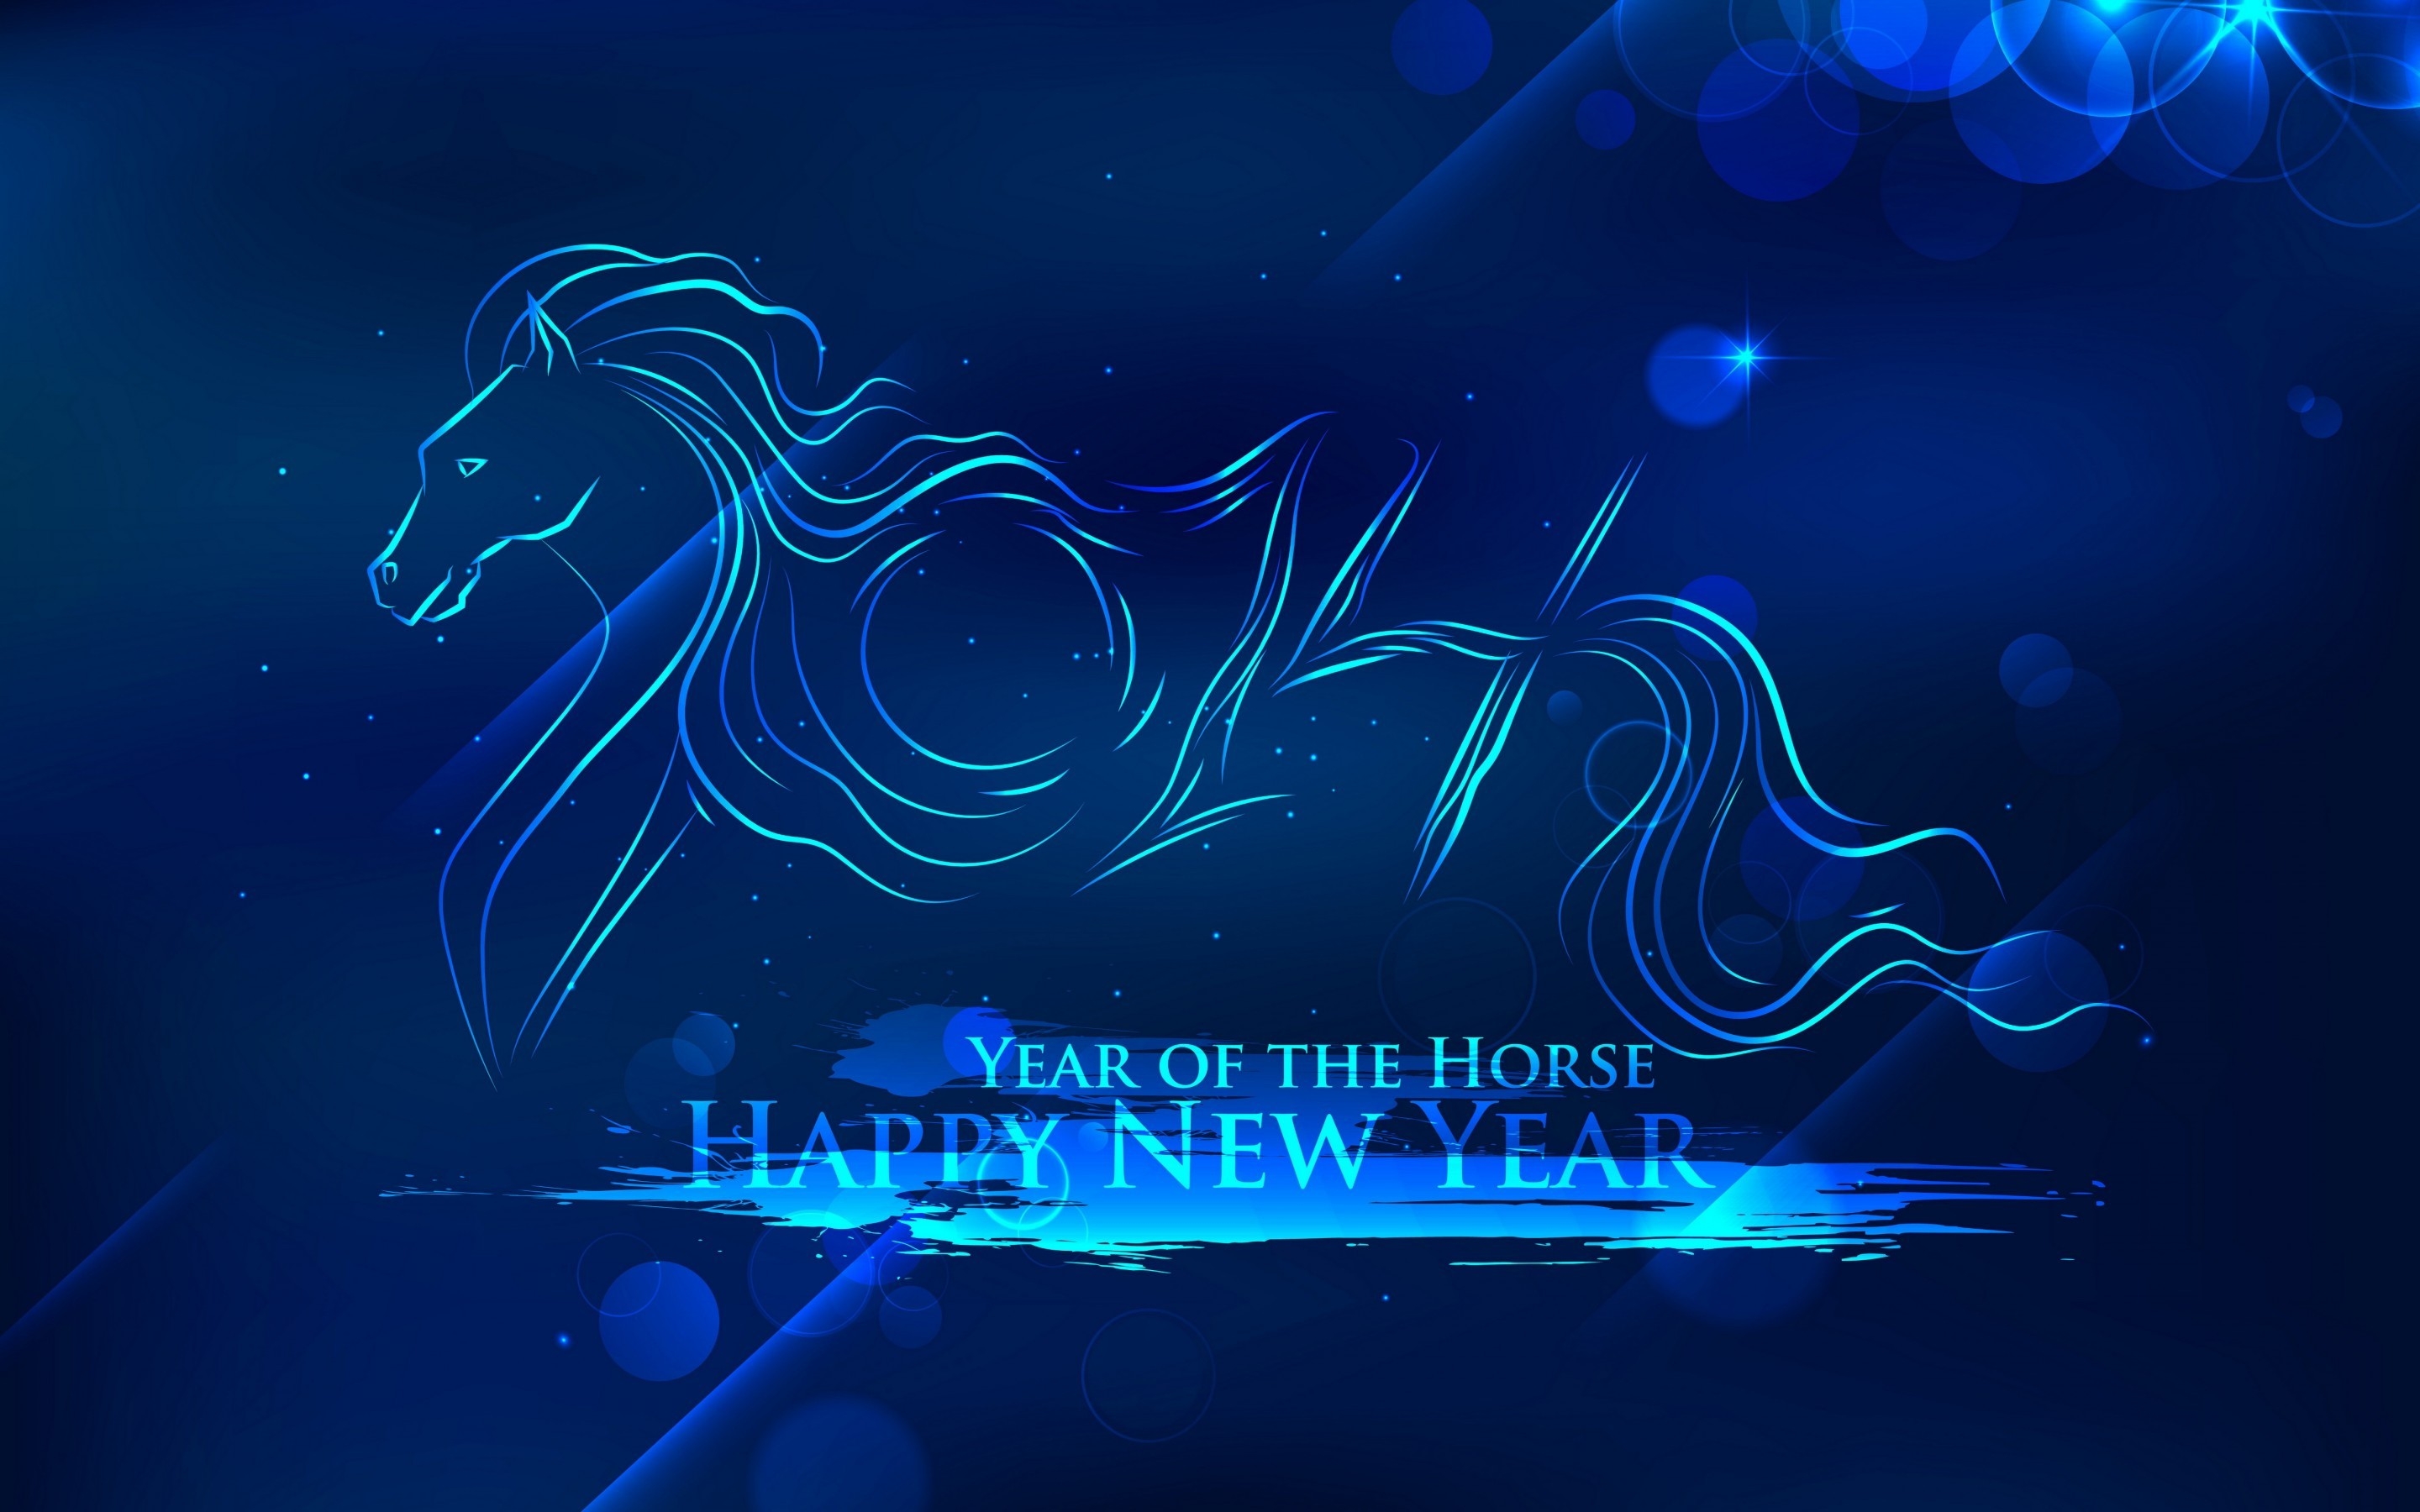 2014 Horse Year for 2880 x 1800 Retina Display resolution